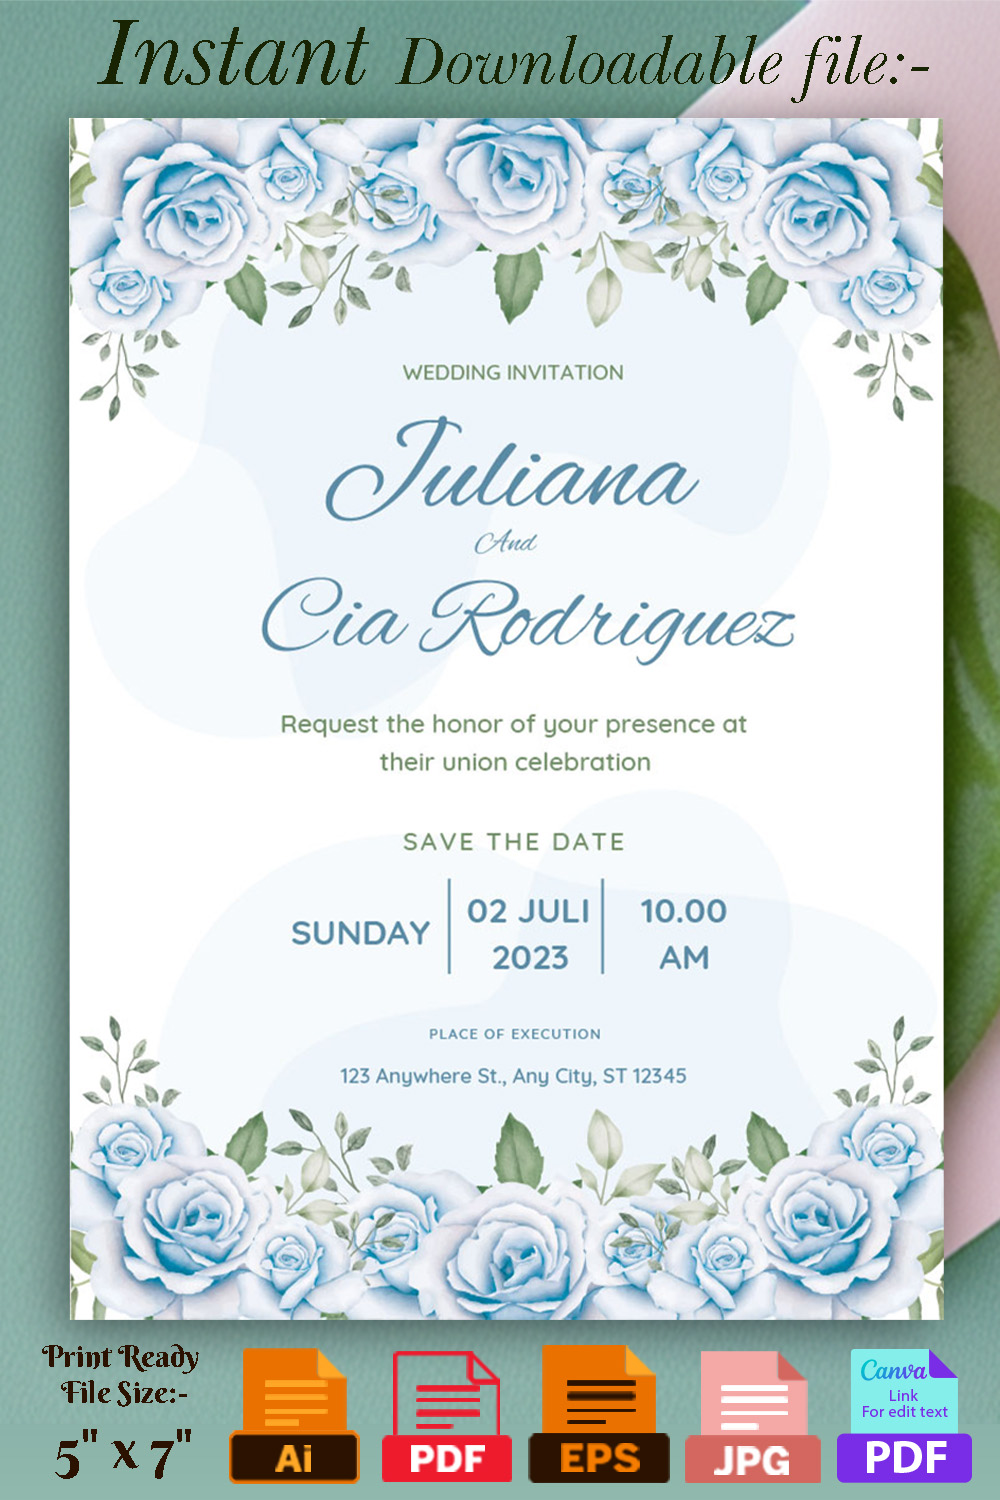 Image with gorgeous wedding invitation card with watercolor roses.